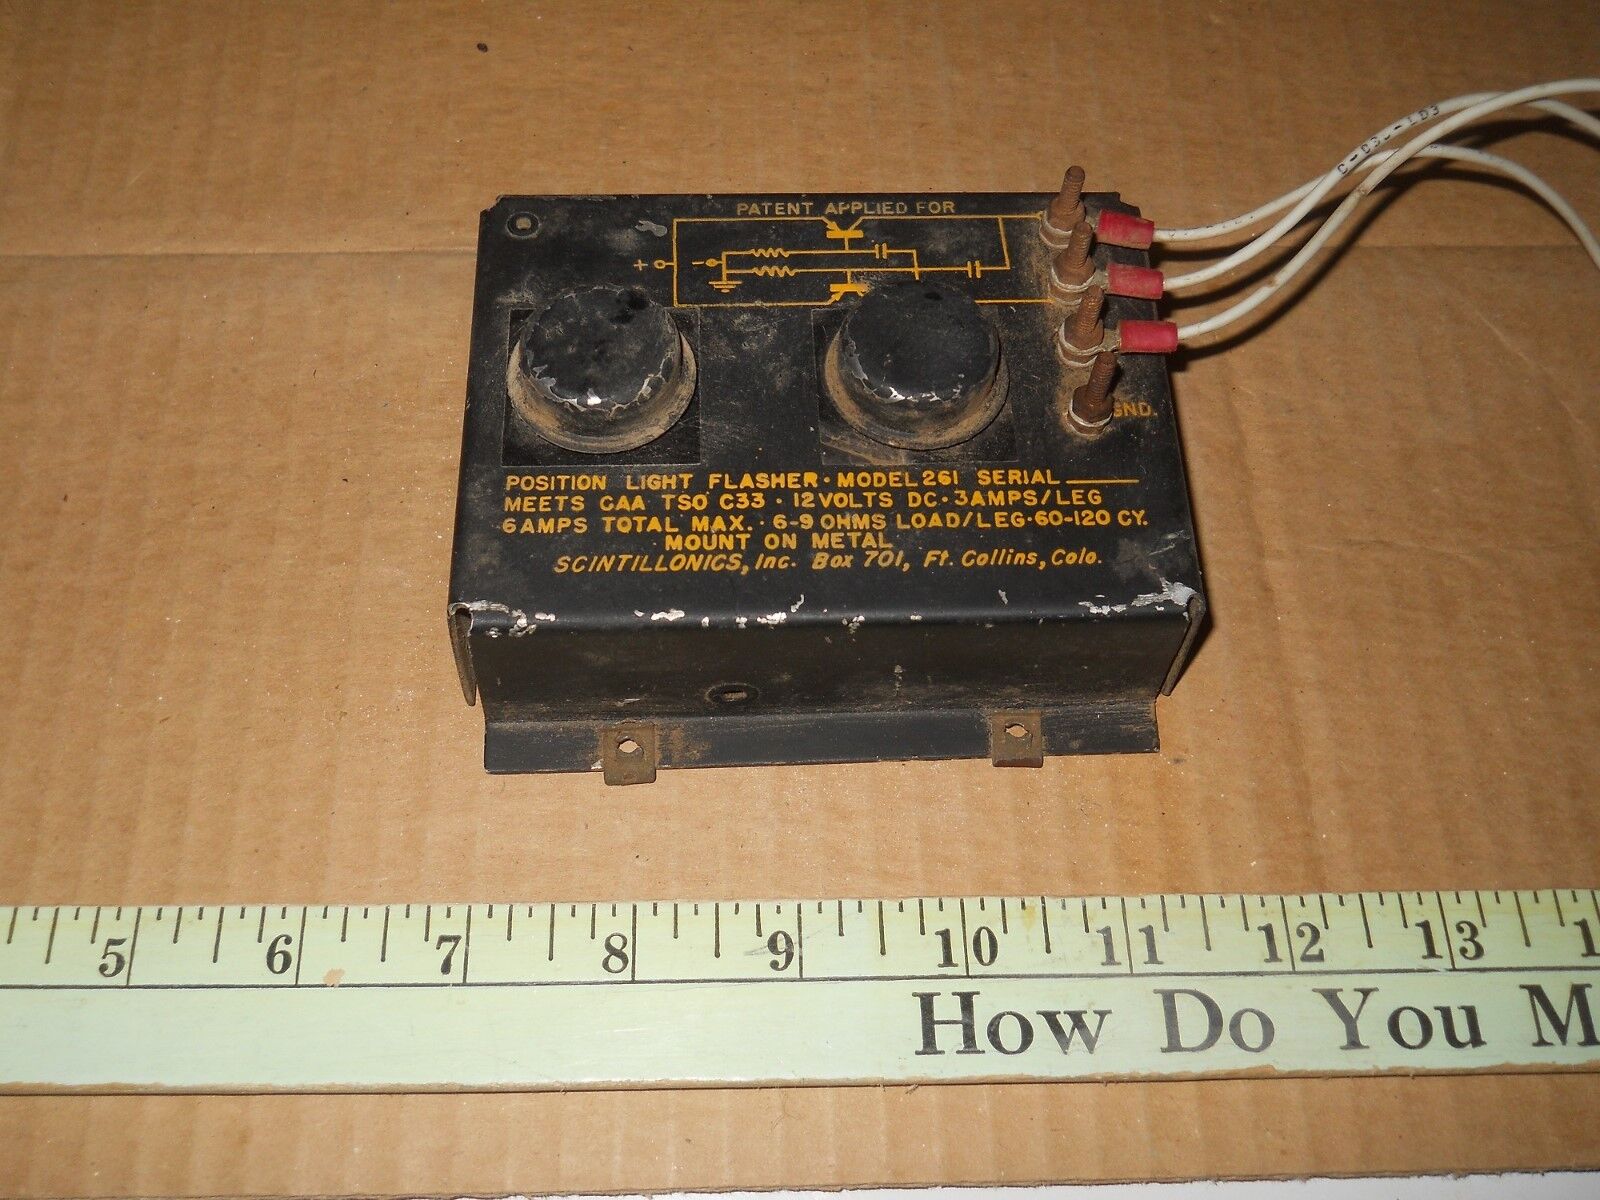 Scintillonics 261 Position light flasher, Aircraft Part sold as Core 